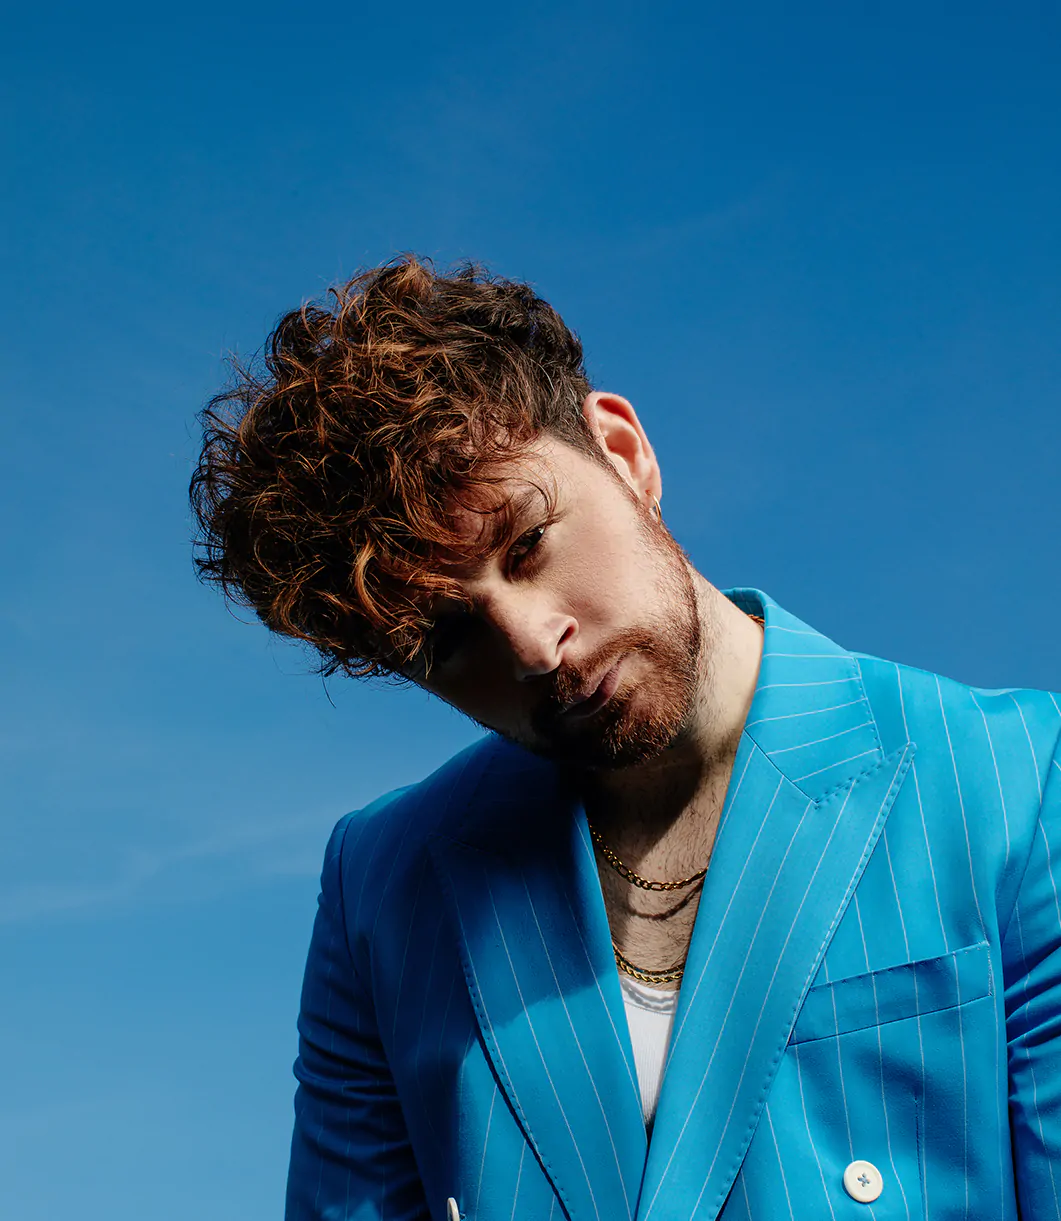 TOM GRENNAN shares new single ‘Little Bit Of Love’ ahead of new album ‘Evering Road’ due March 5th